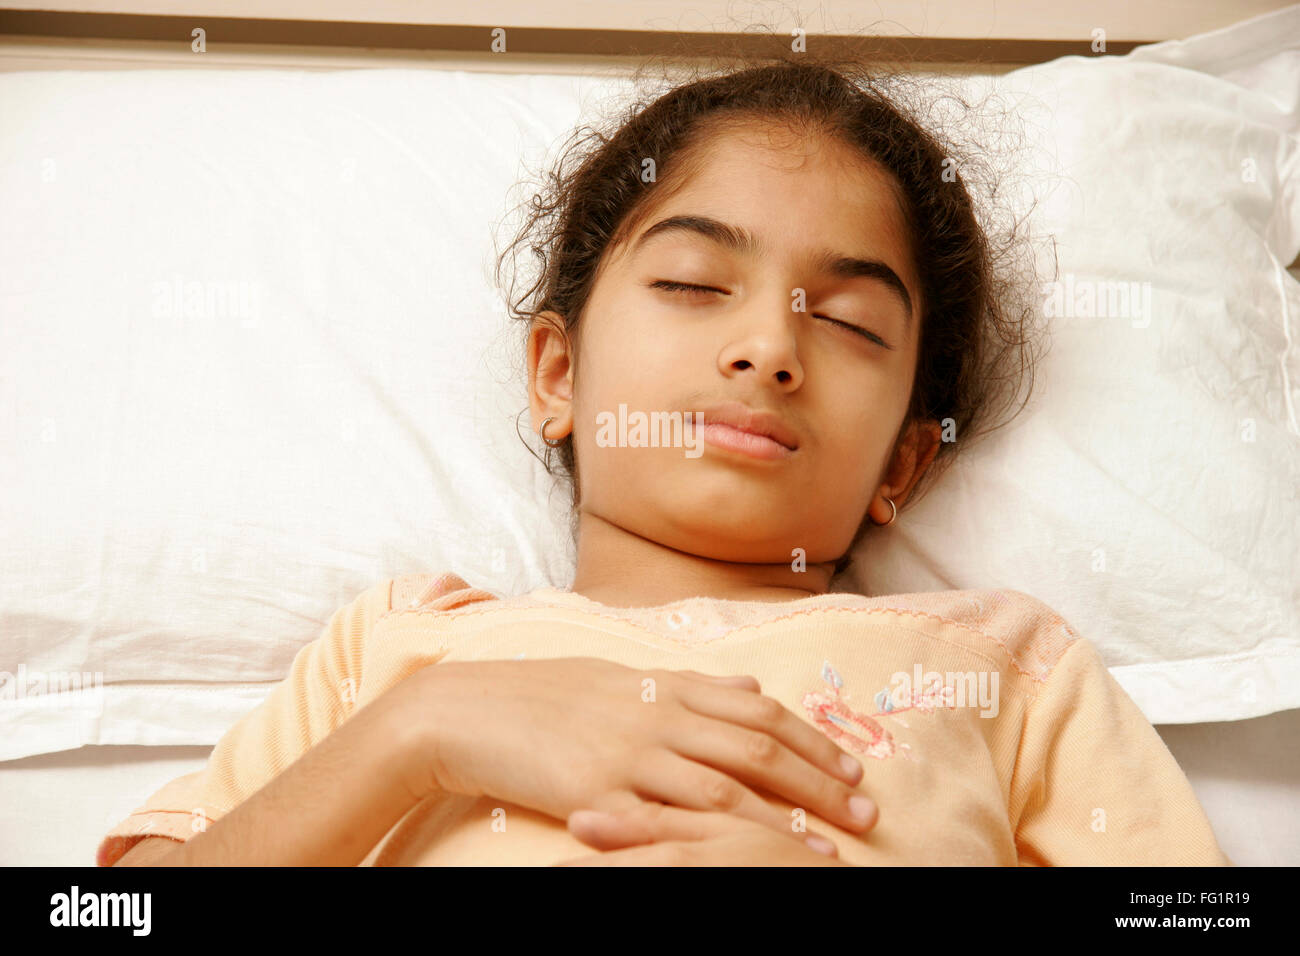 South Asian Indian 9 years old girl wearing peach colour nightwear having sound asleep on bed MR#191 Stock Photo